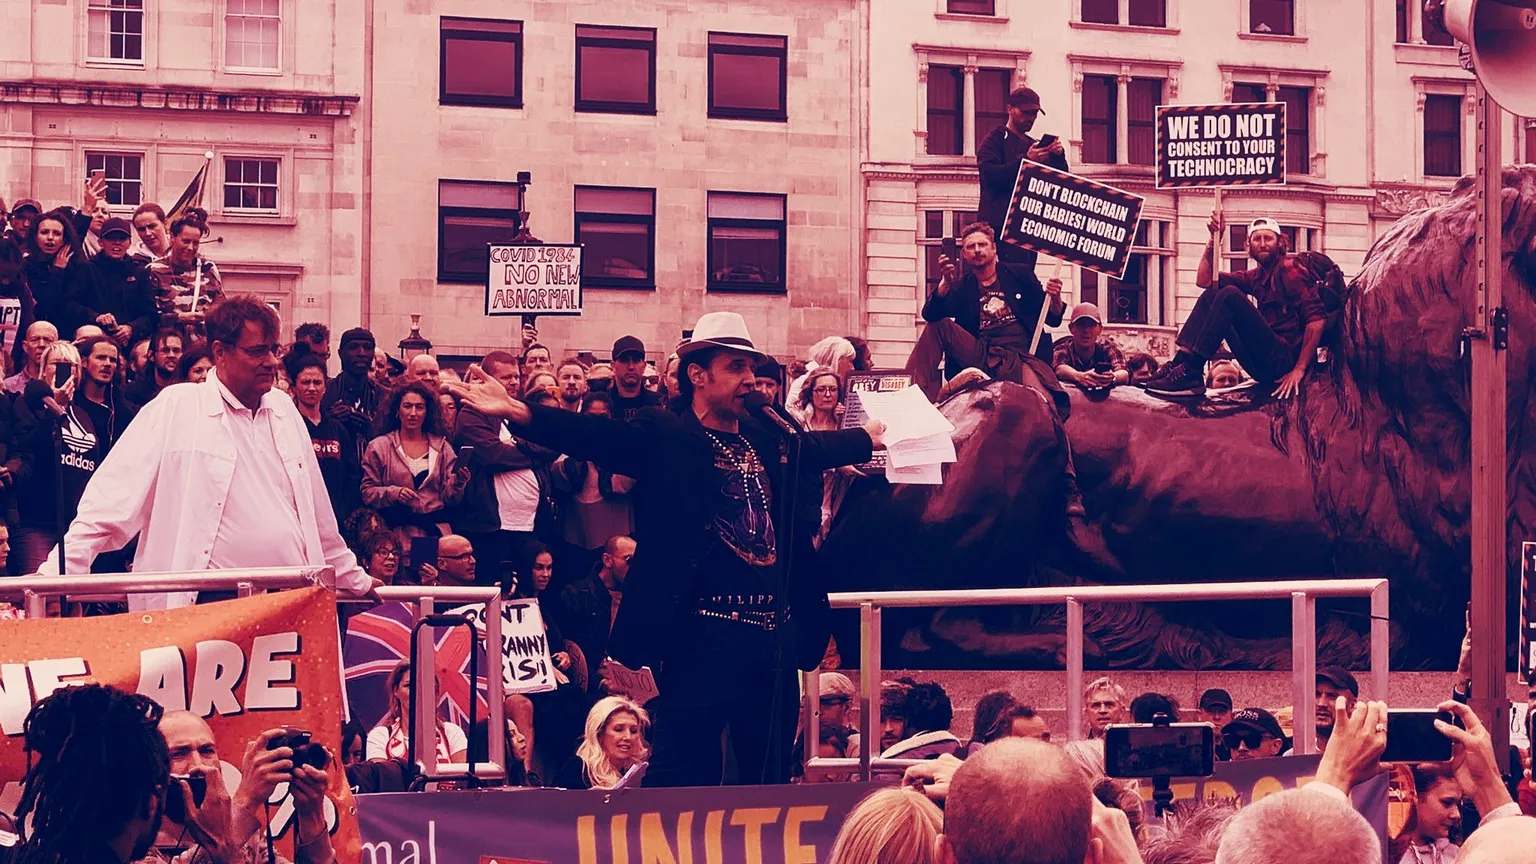 Former X-Factor contestant Chico entertains the crowd at London's anti-lockdown march on Saturday. Image: Twitter